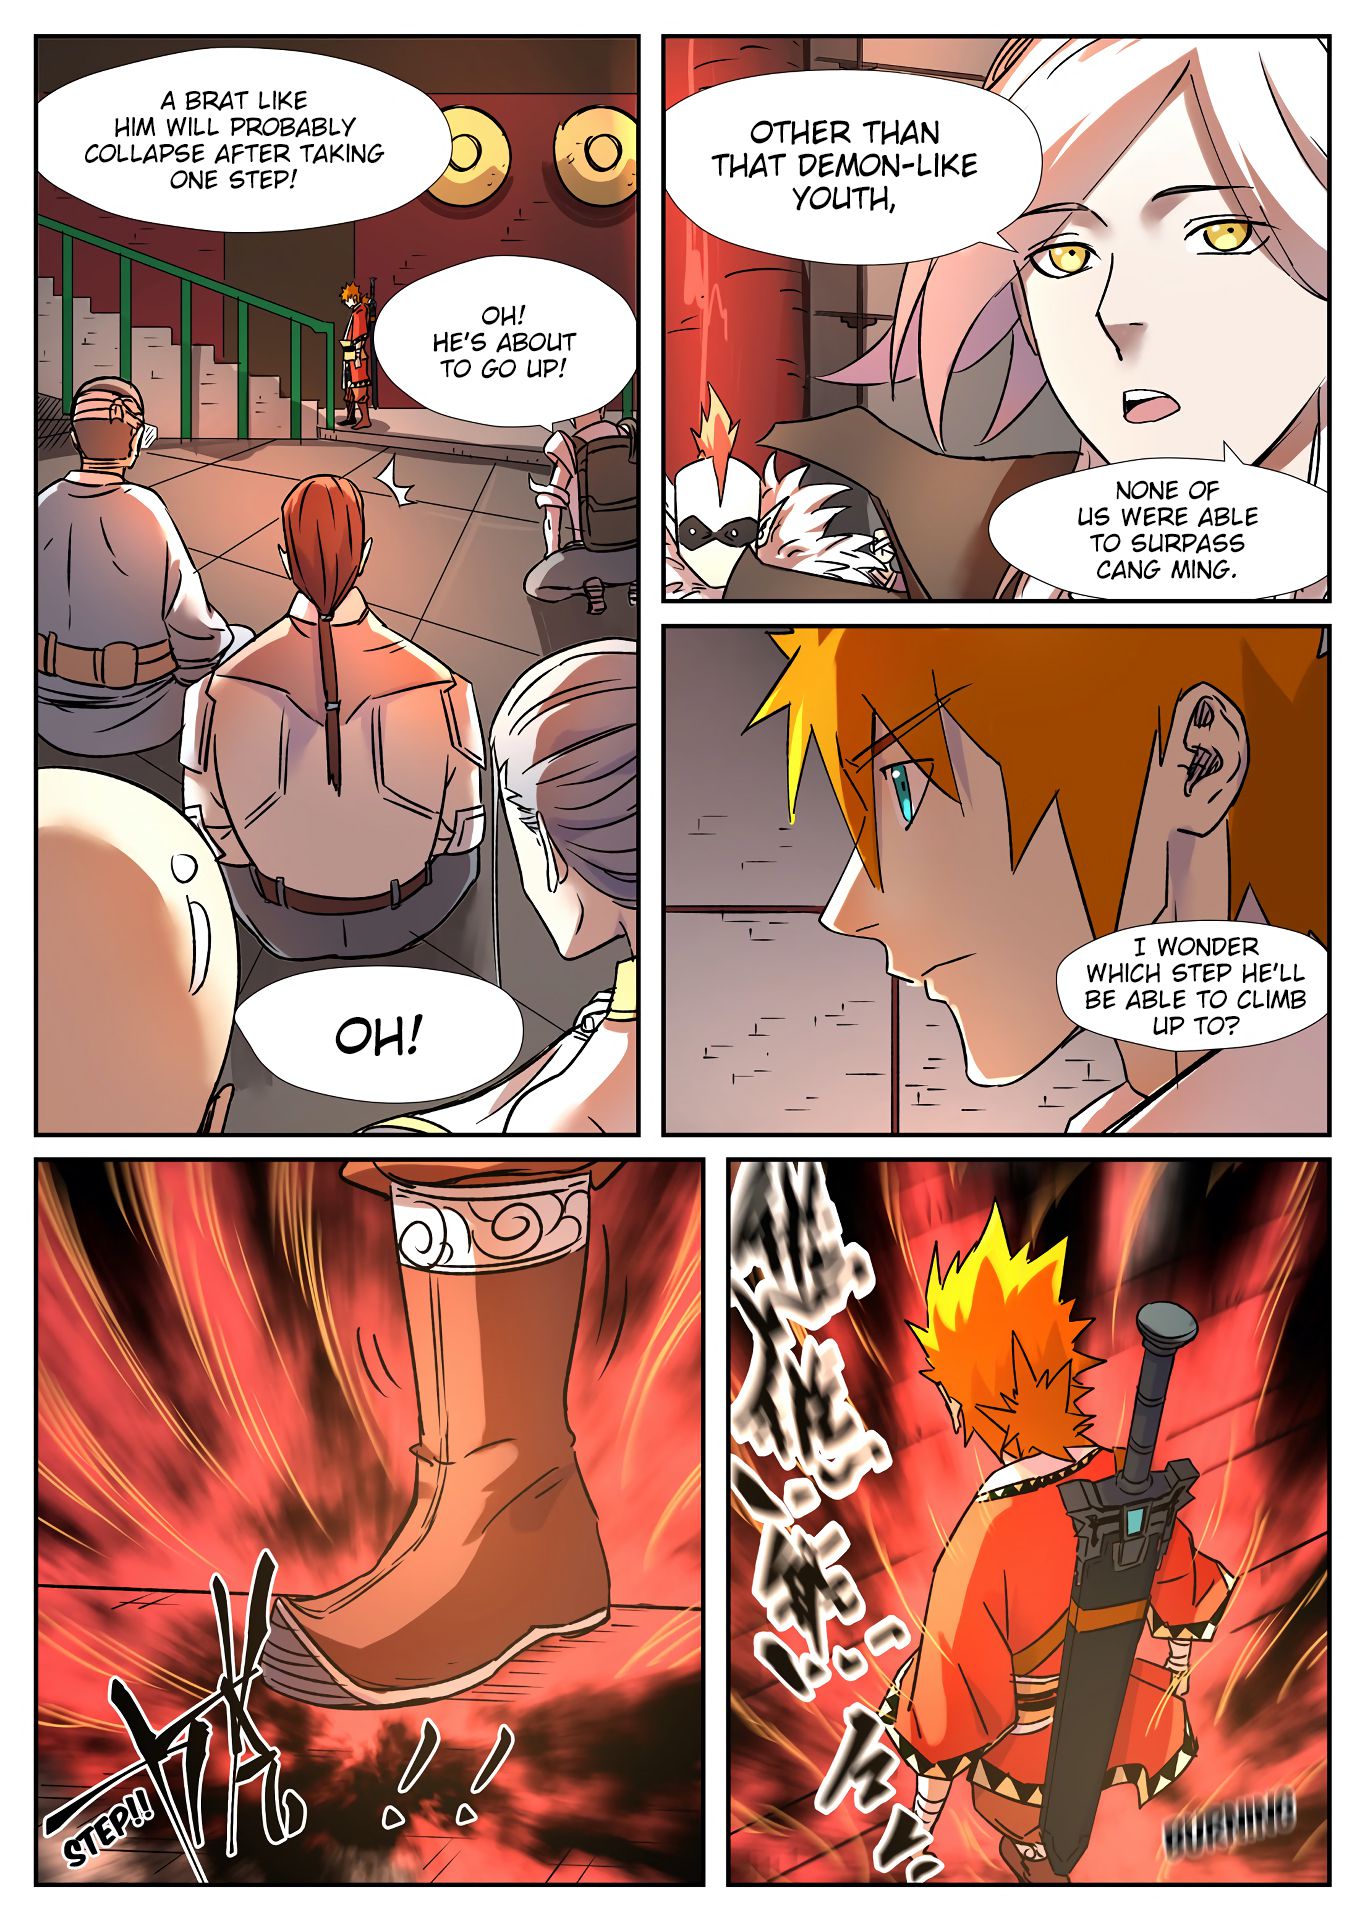 Tales of Demons and Gods chapter 281 page 5